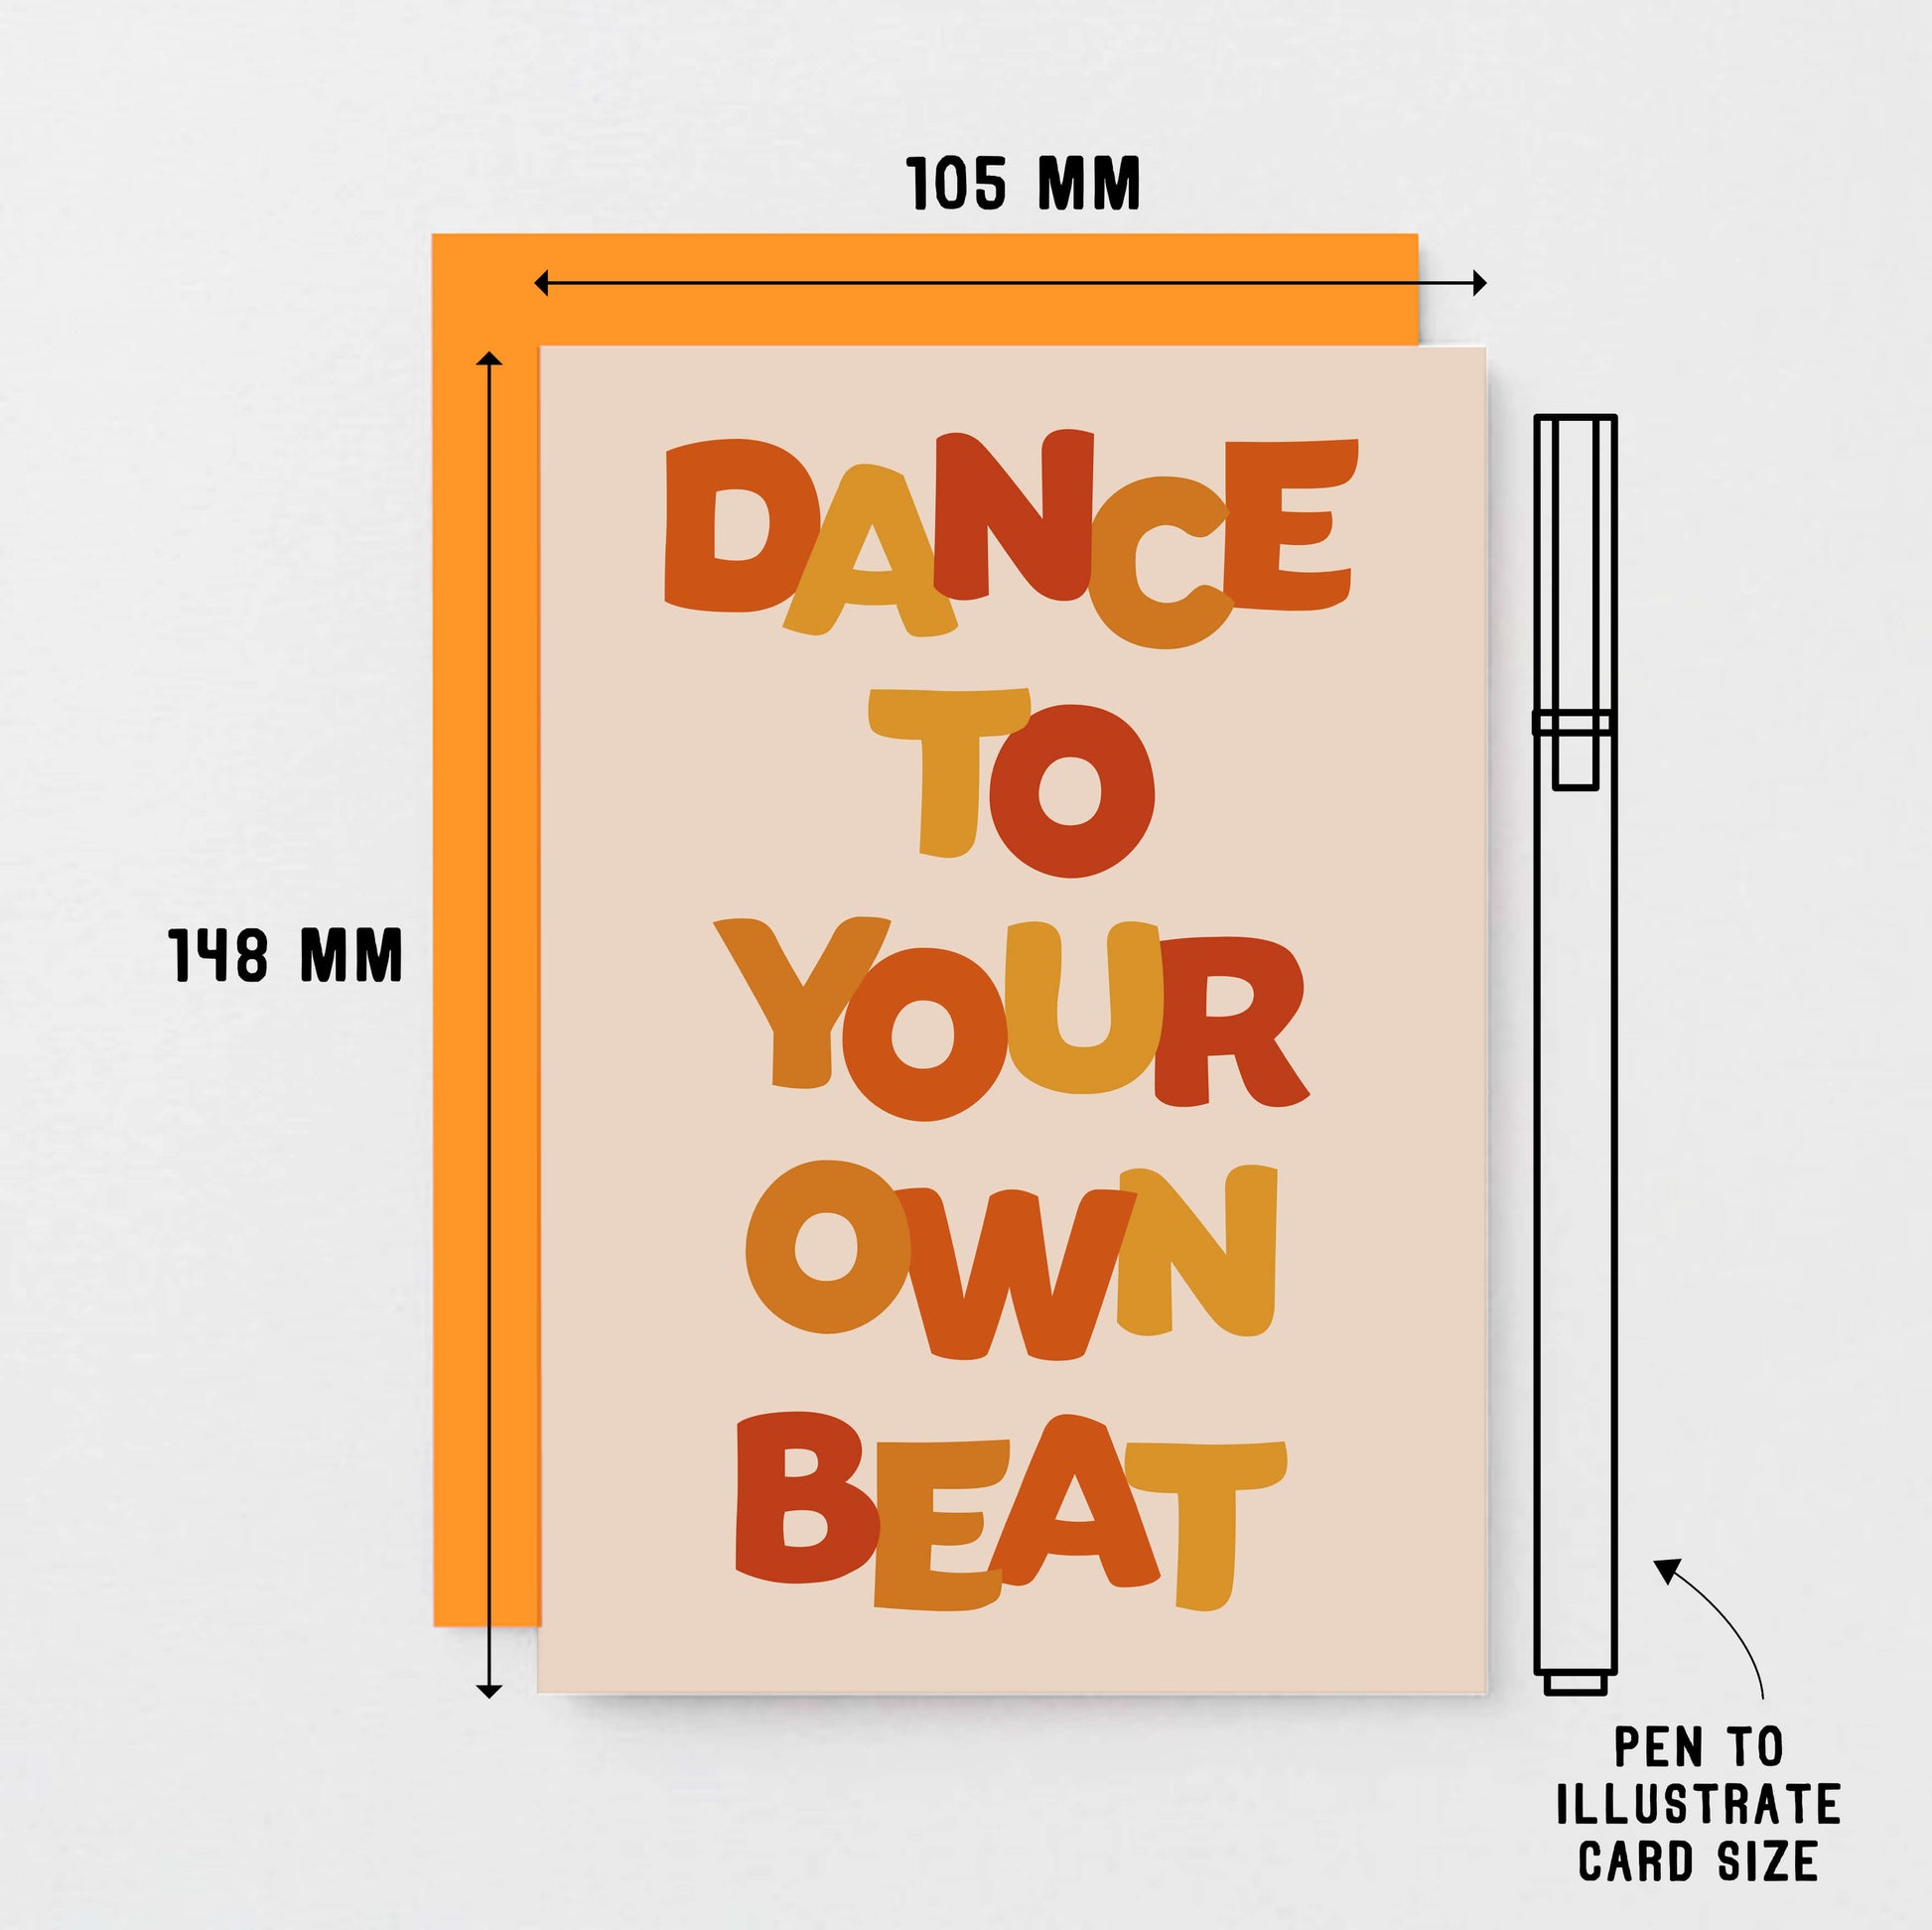 Dance To Your Own Beat by SixElevenCreations. Product Code SE0601A6